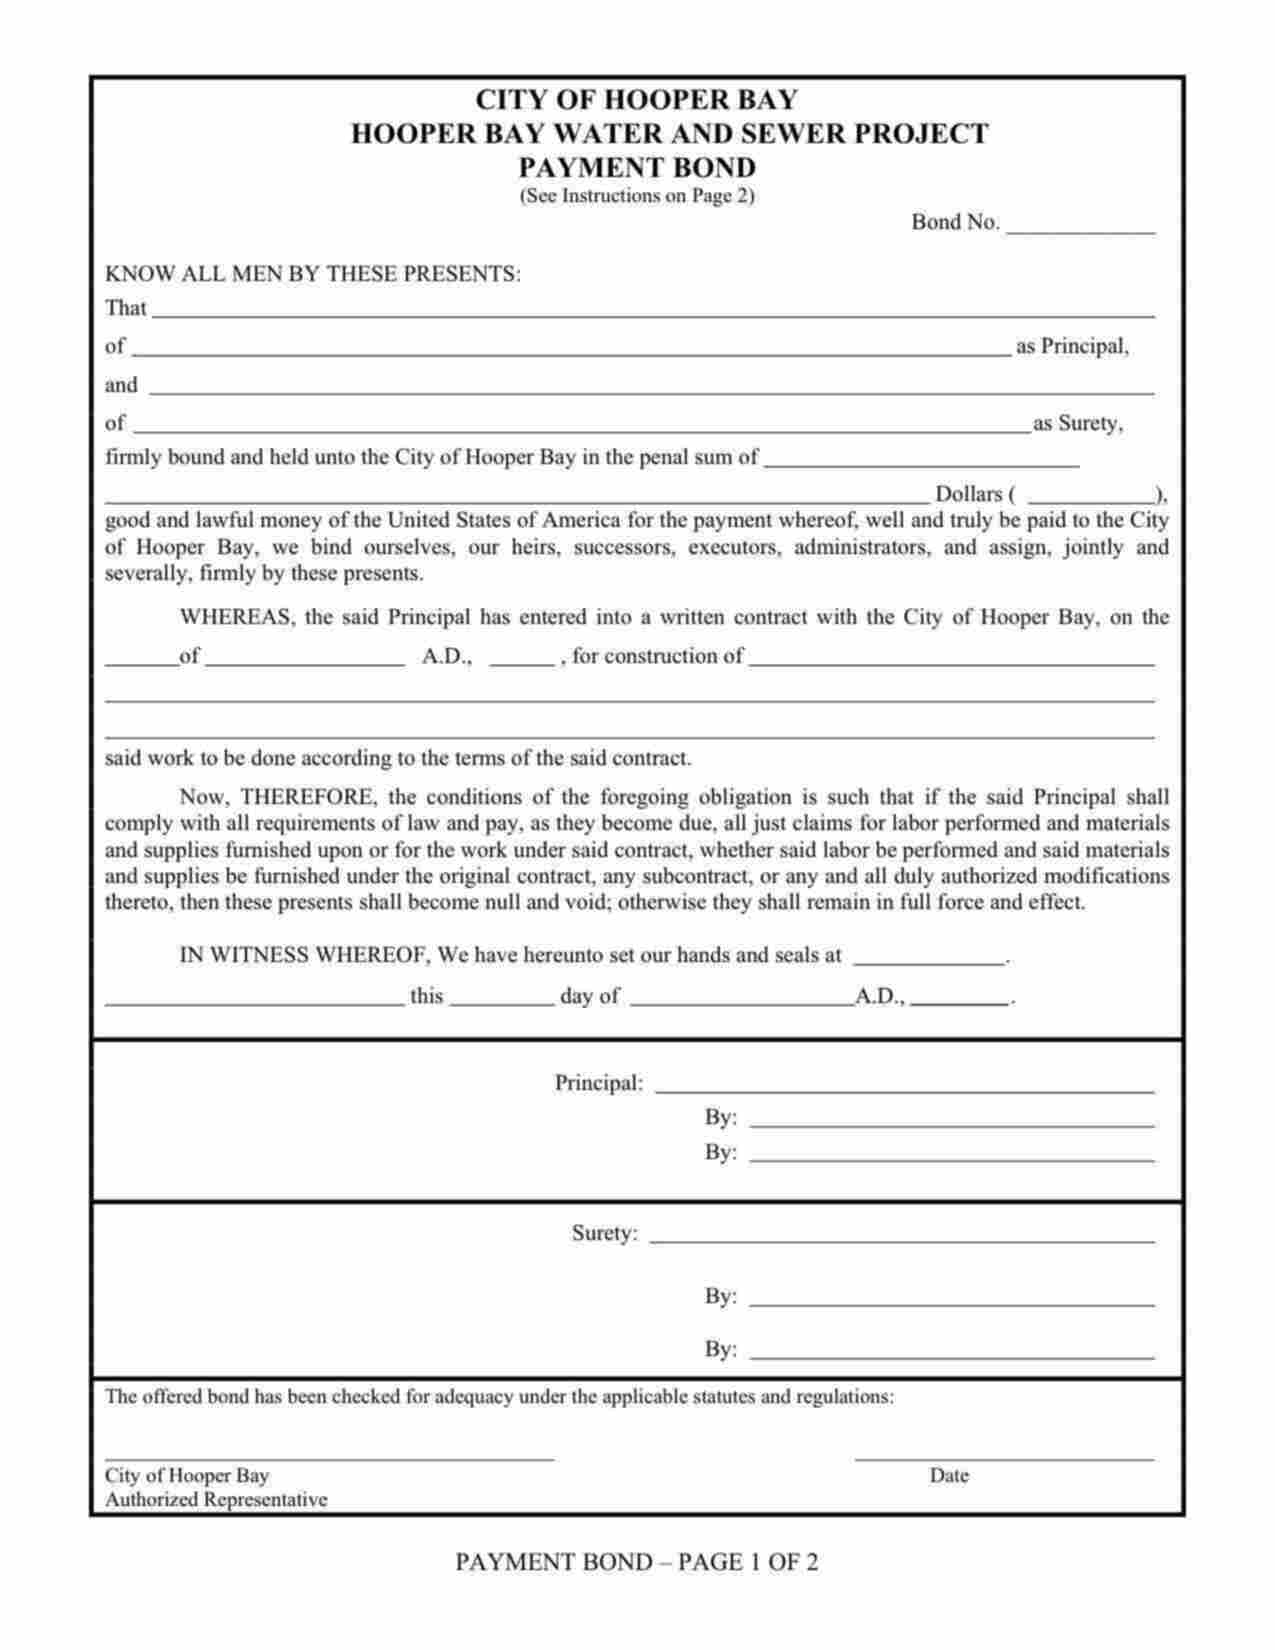 Alaska Water and Sewer Project Payment Bond Form